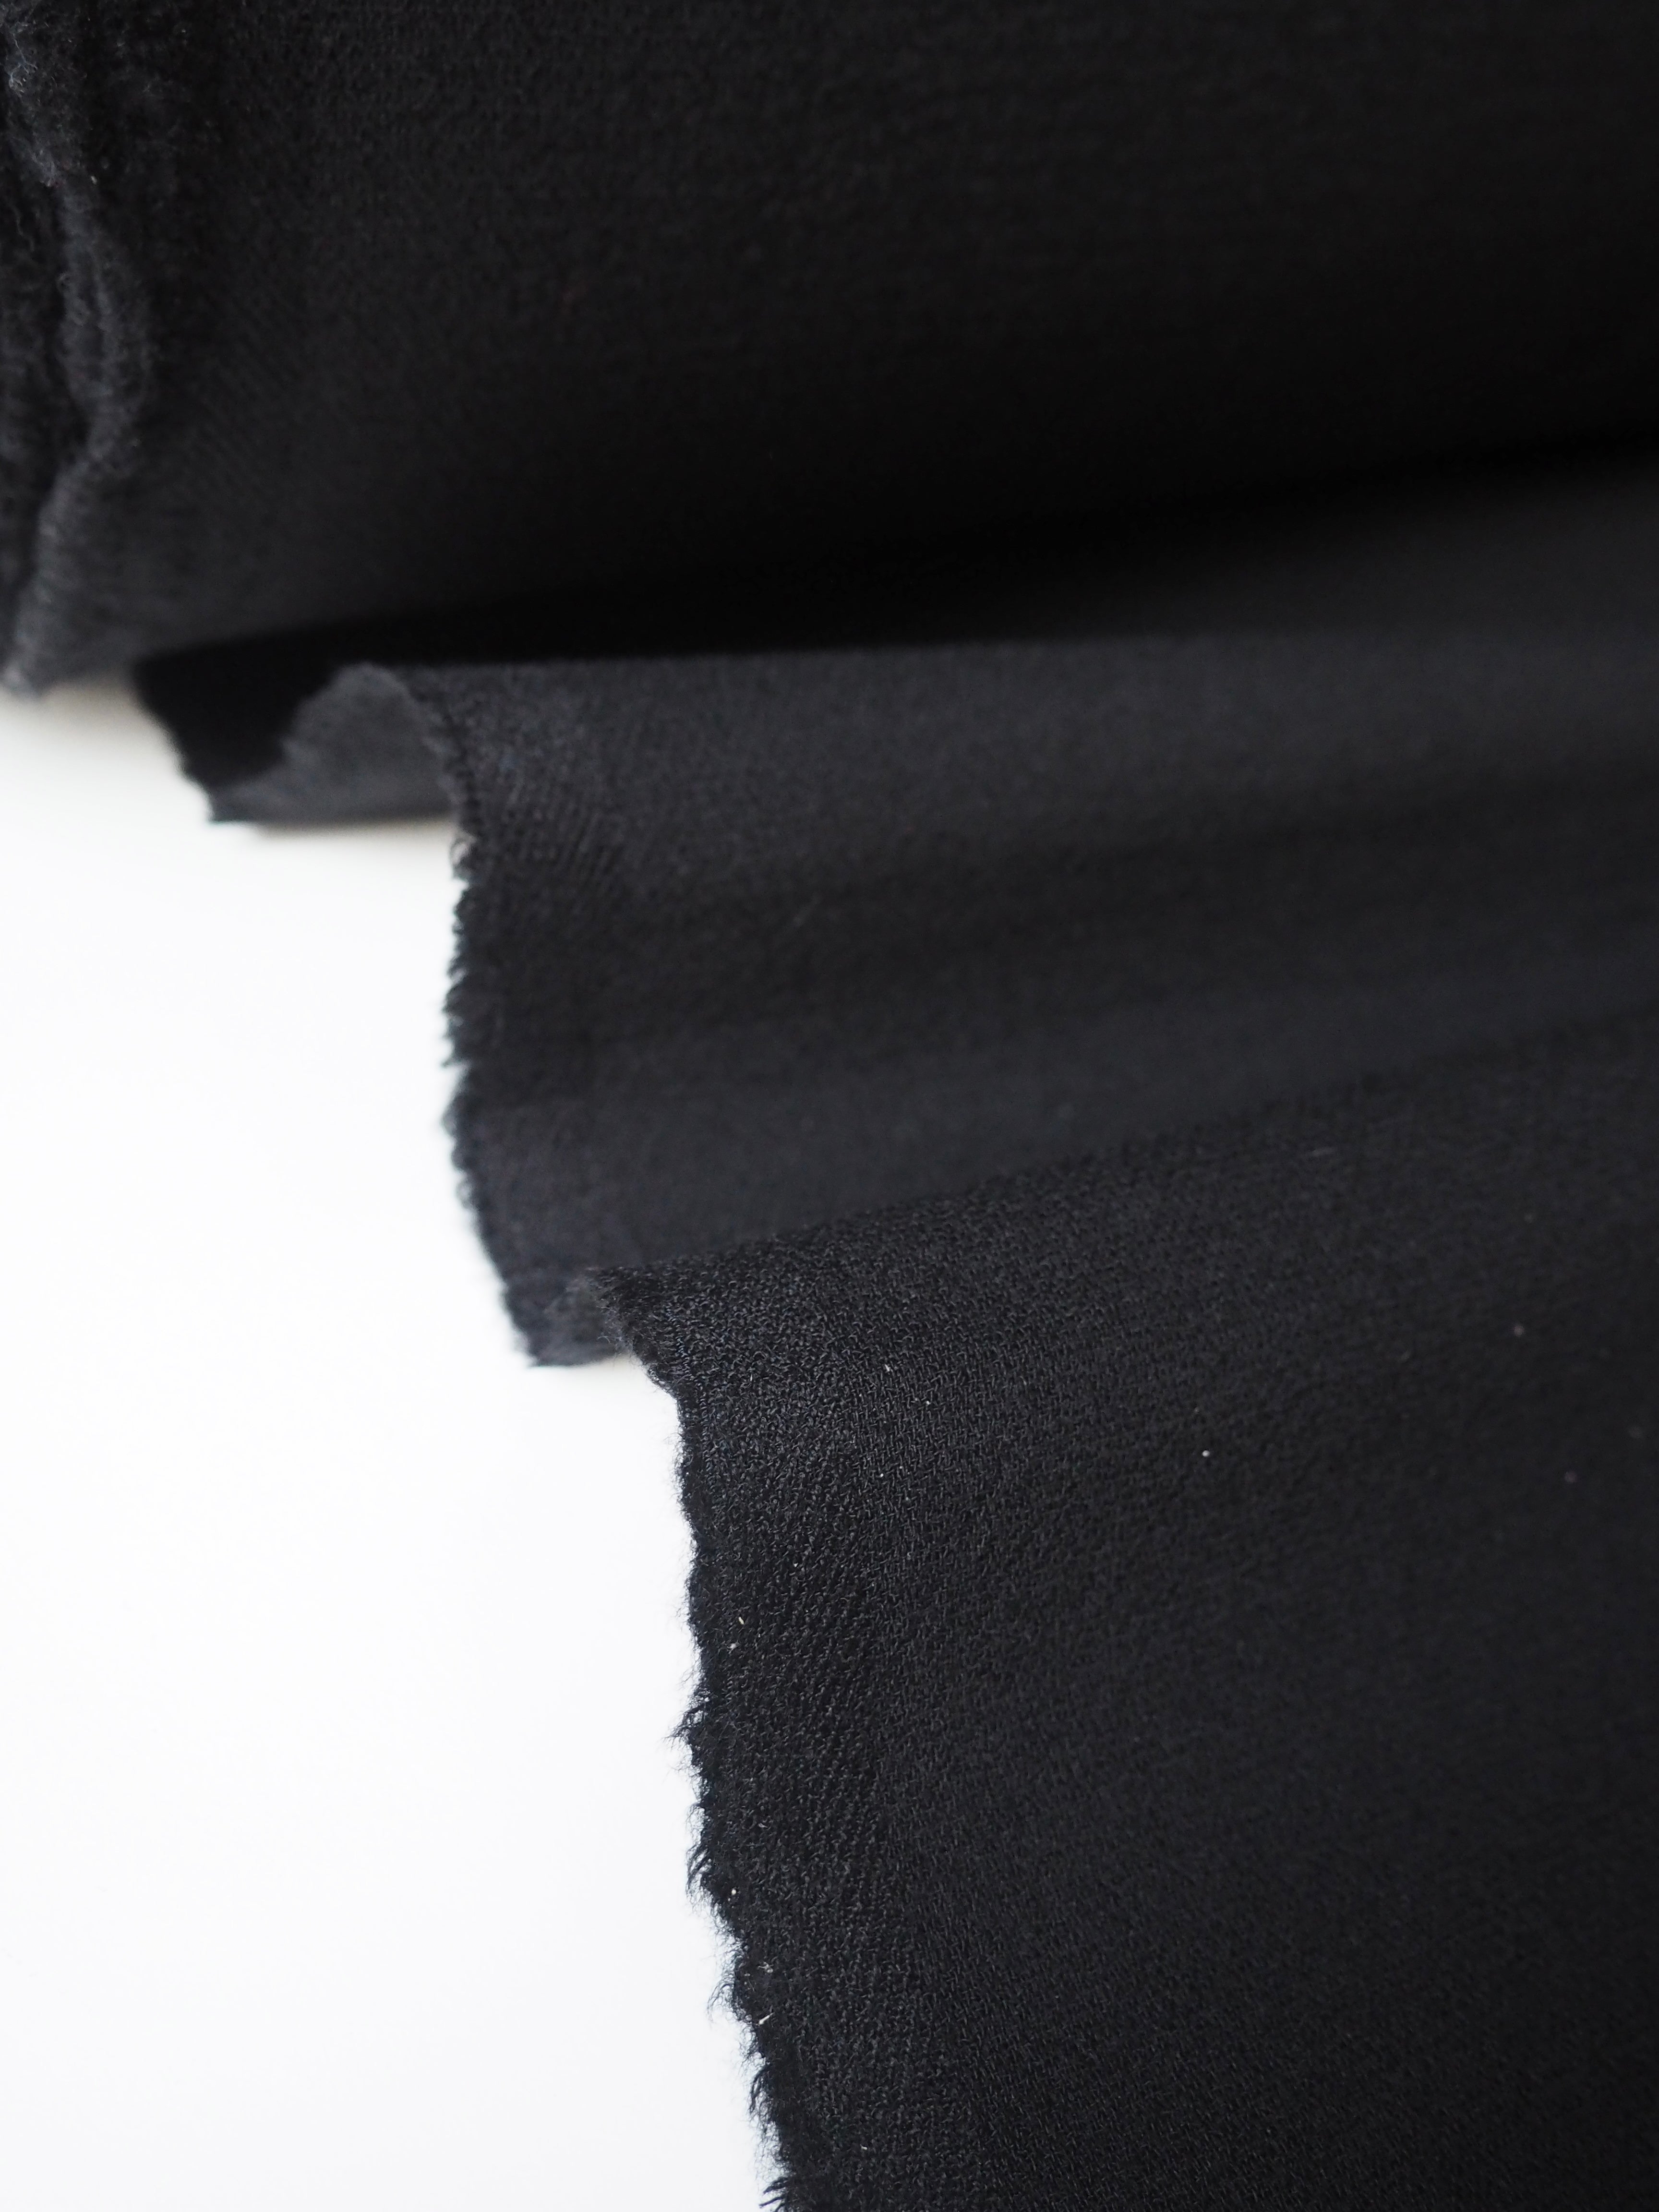 Heavy Crepe Back Satin Black, Fabric by the Yard